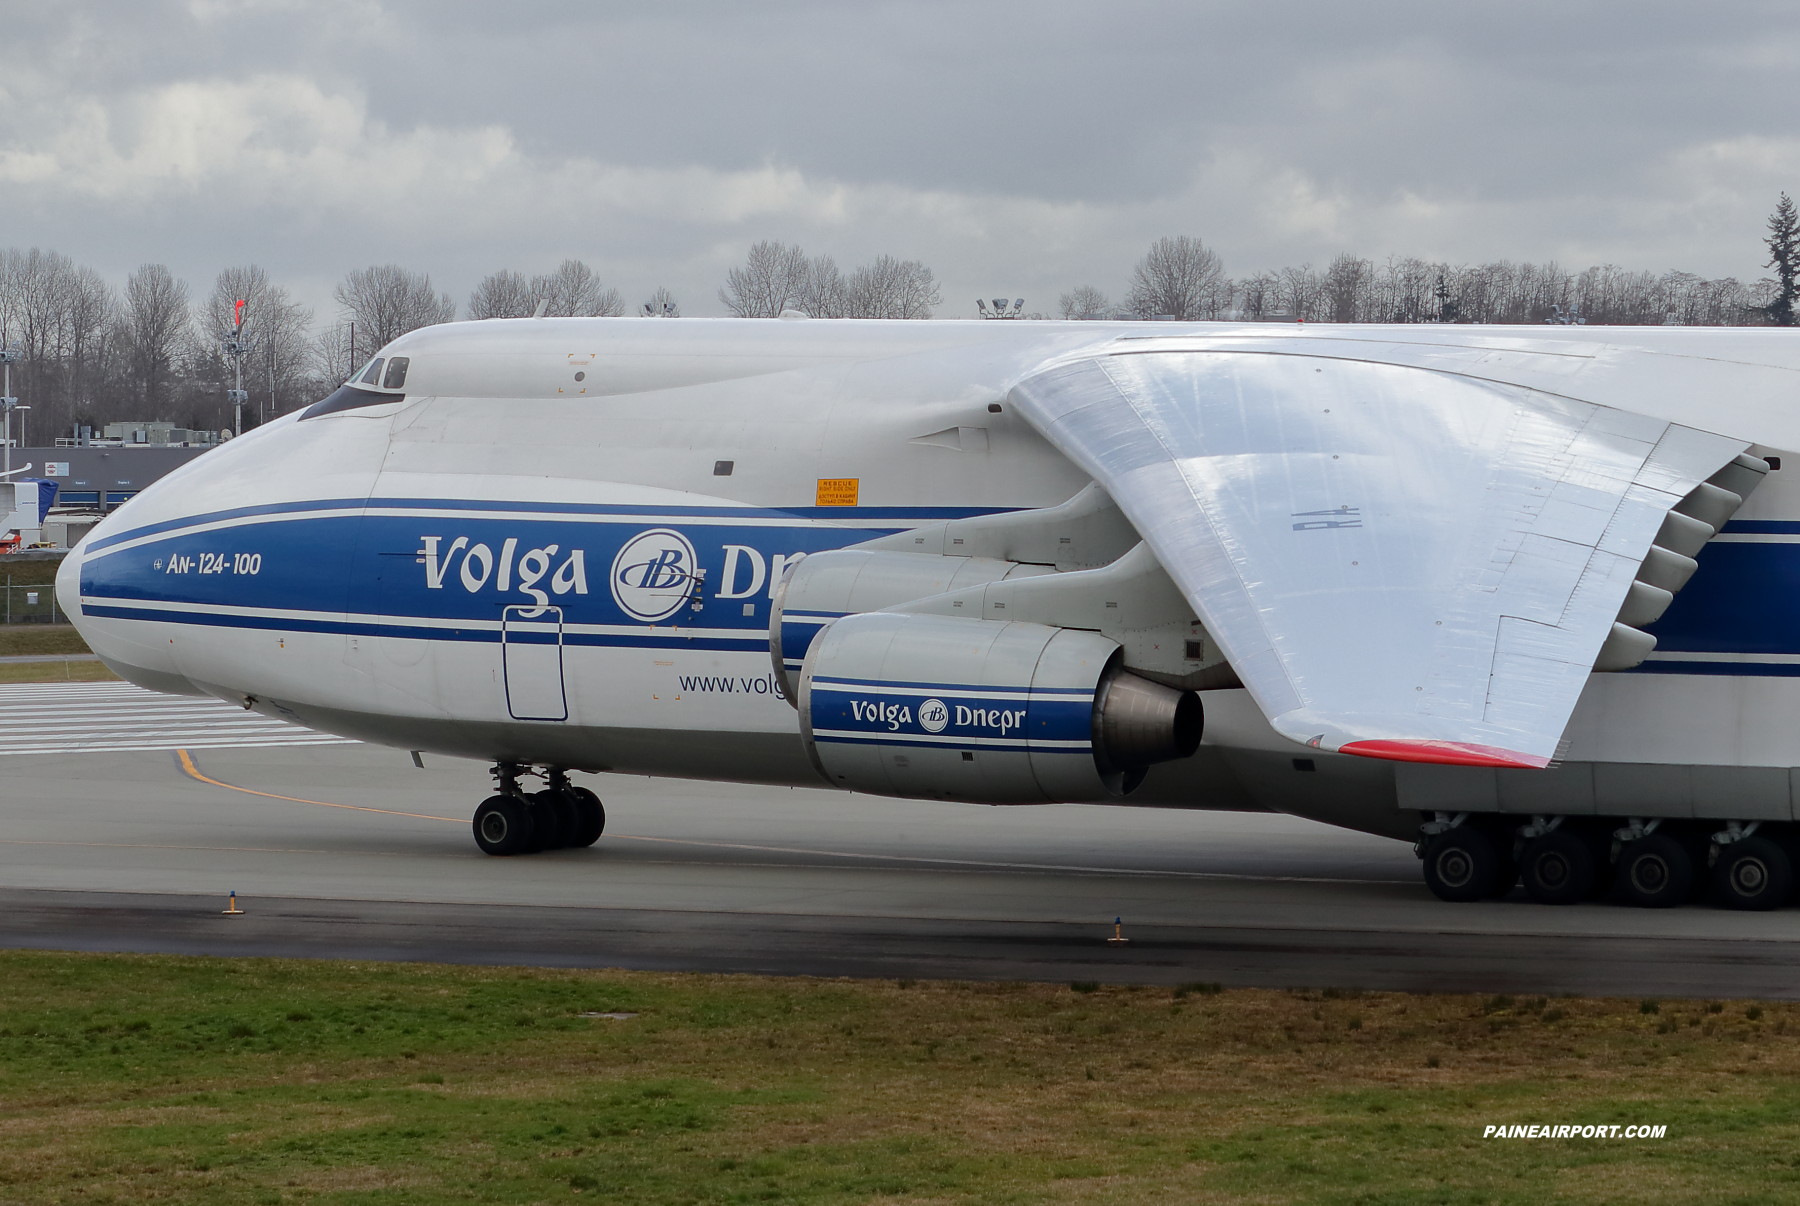 RA-82046 at Paine Field